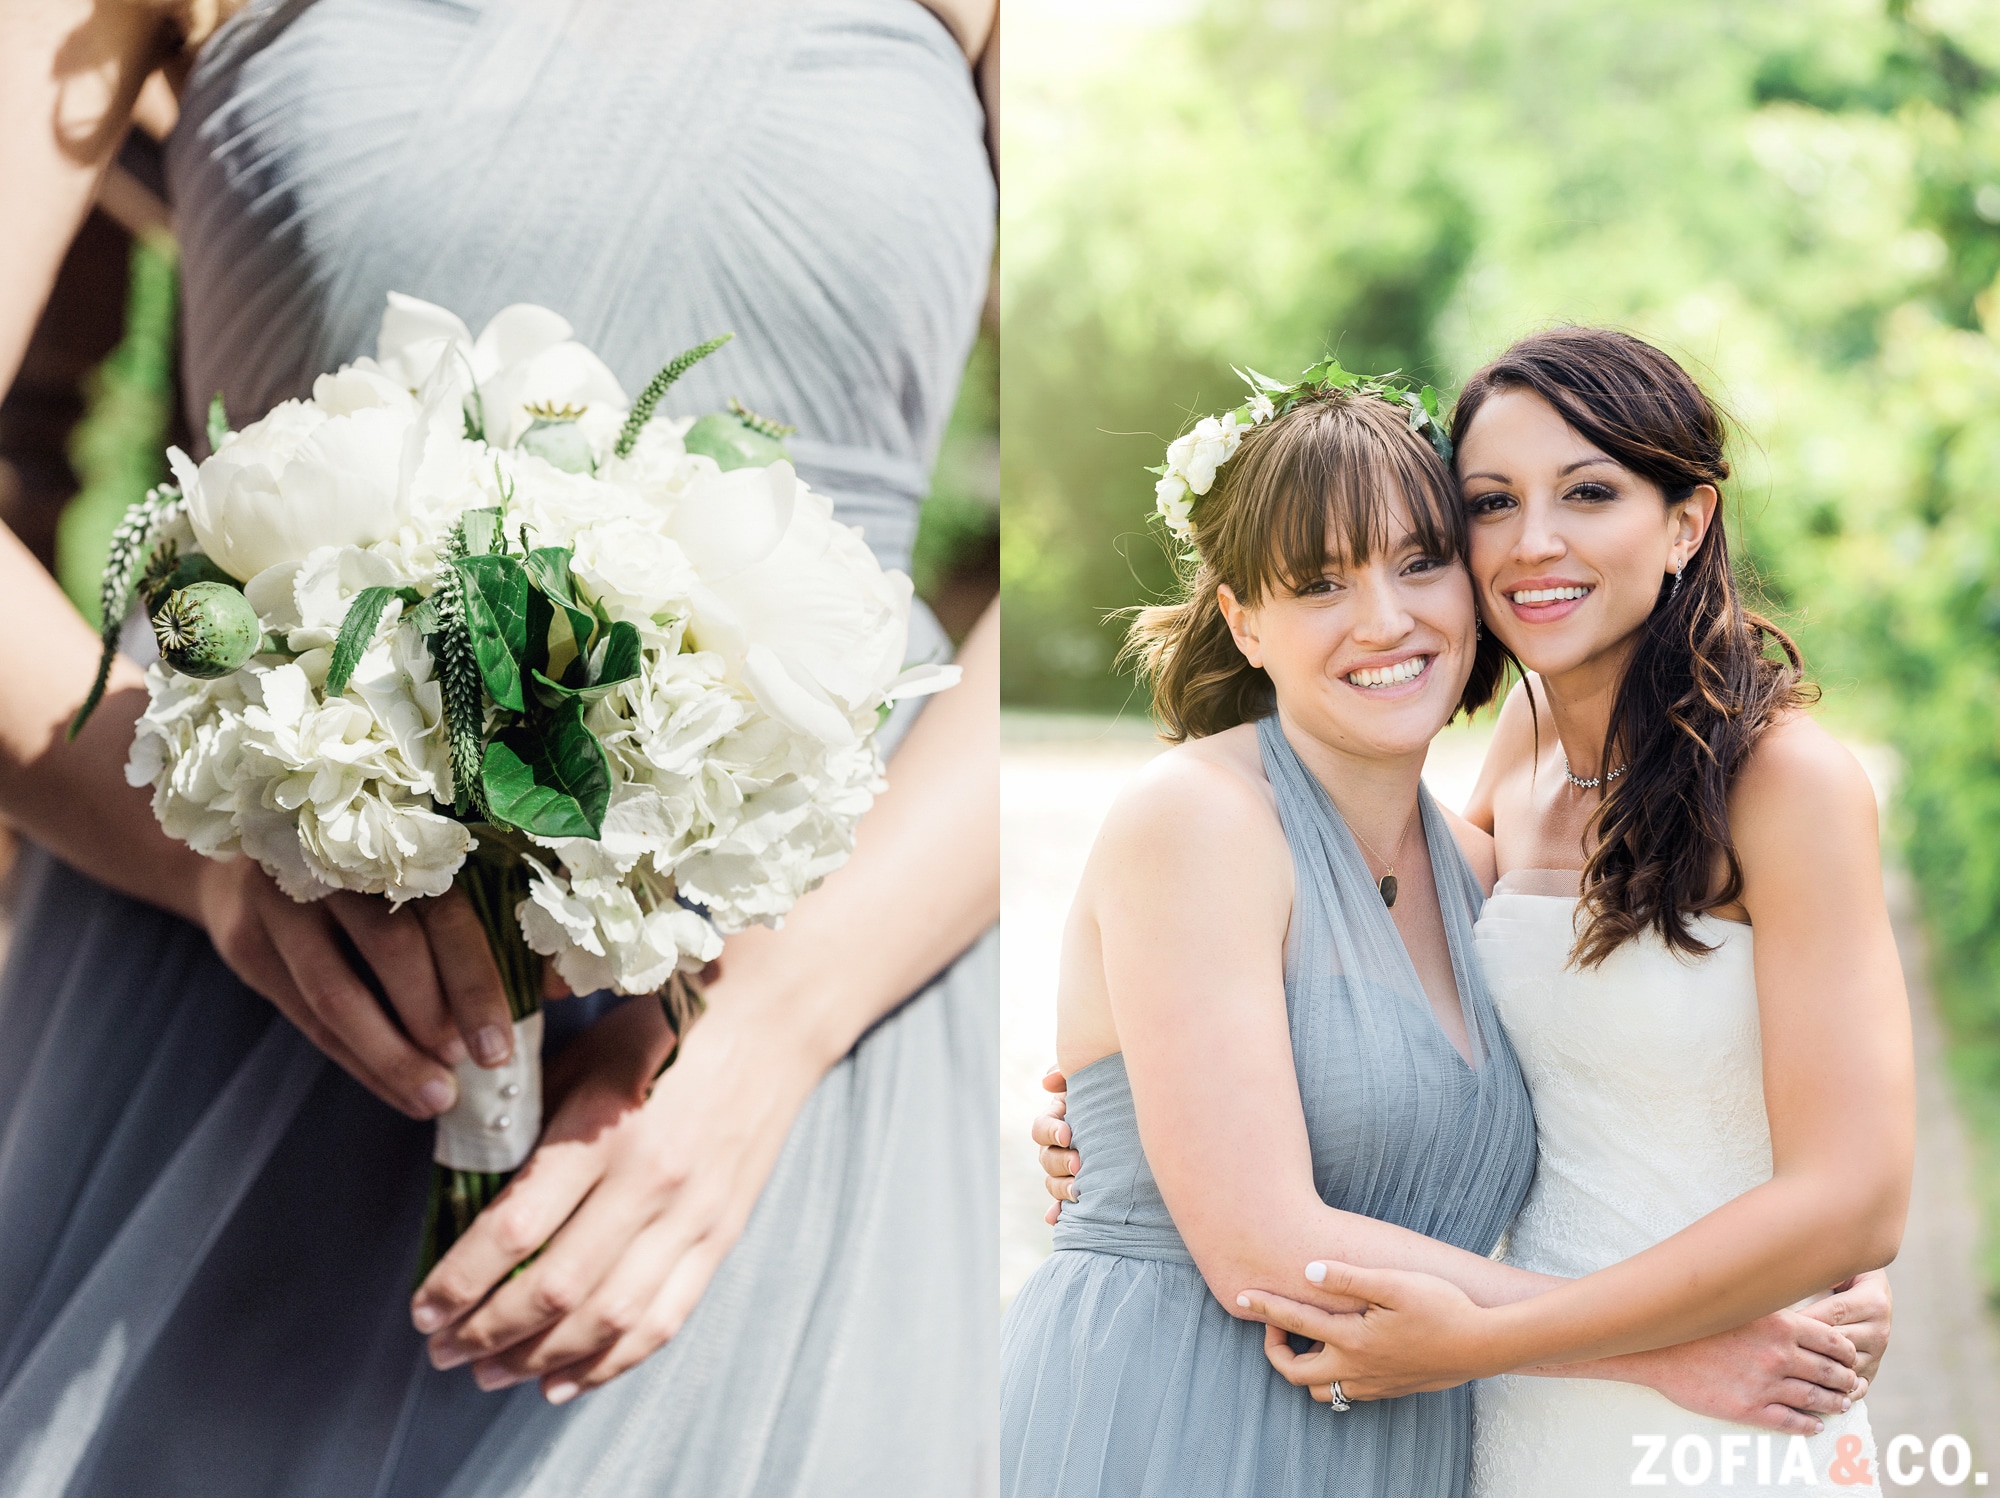 St Mary's Nantucket Wedding in Tom Nevers by Zofia & Co.